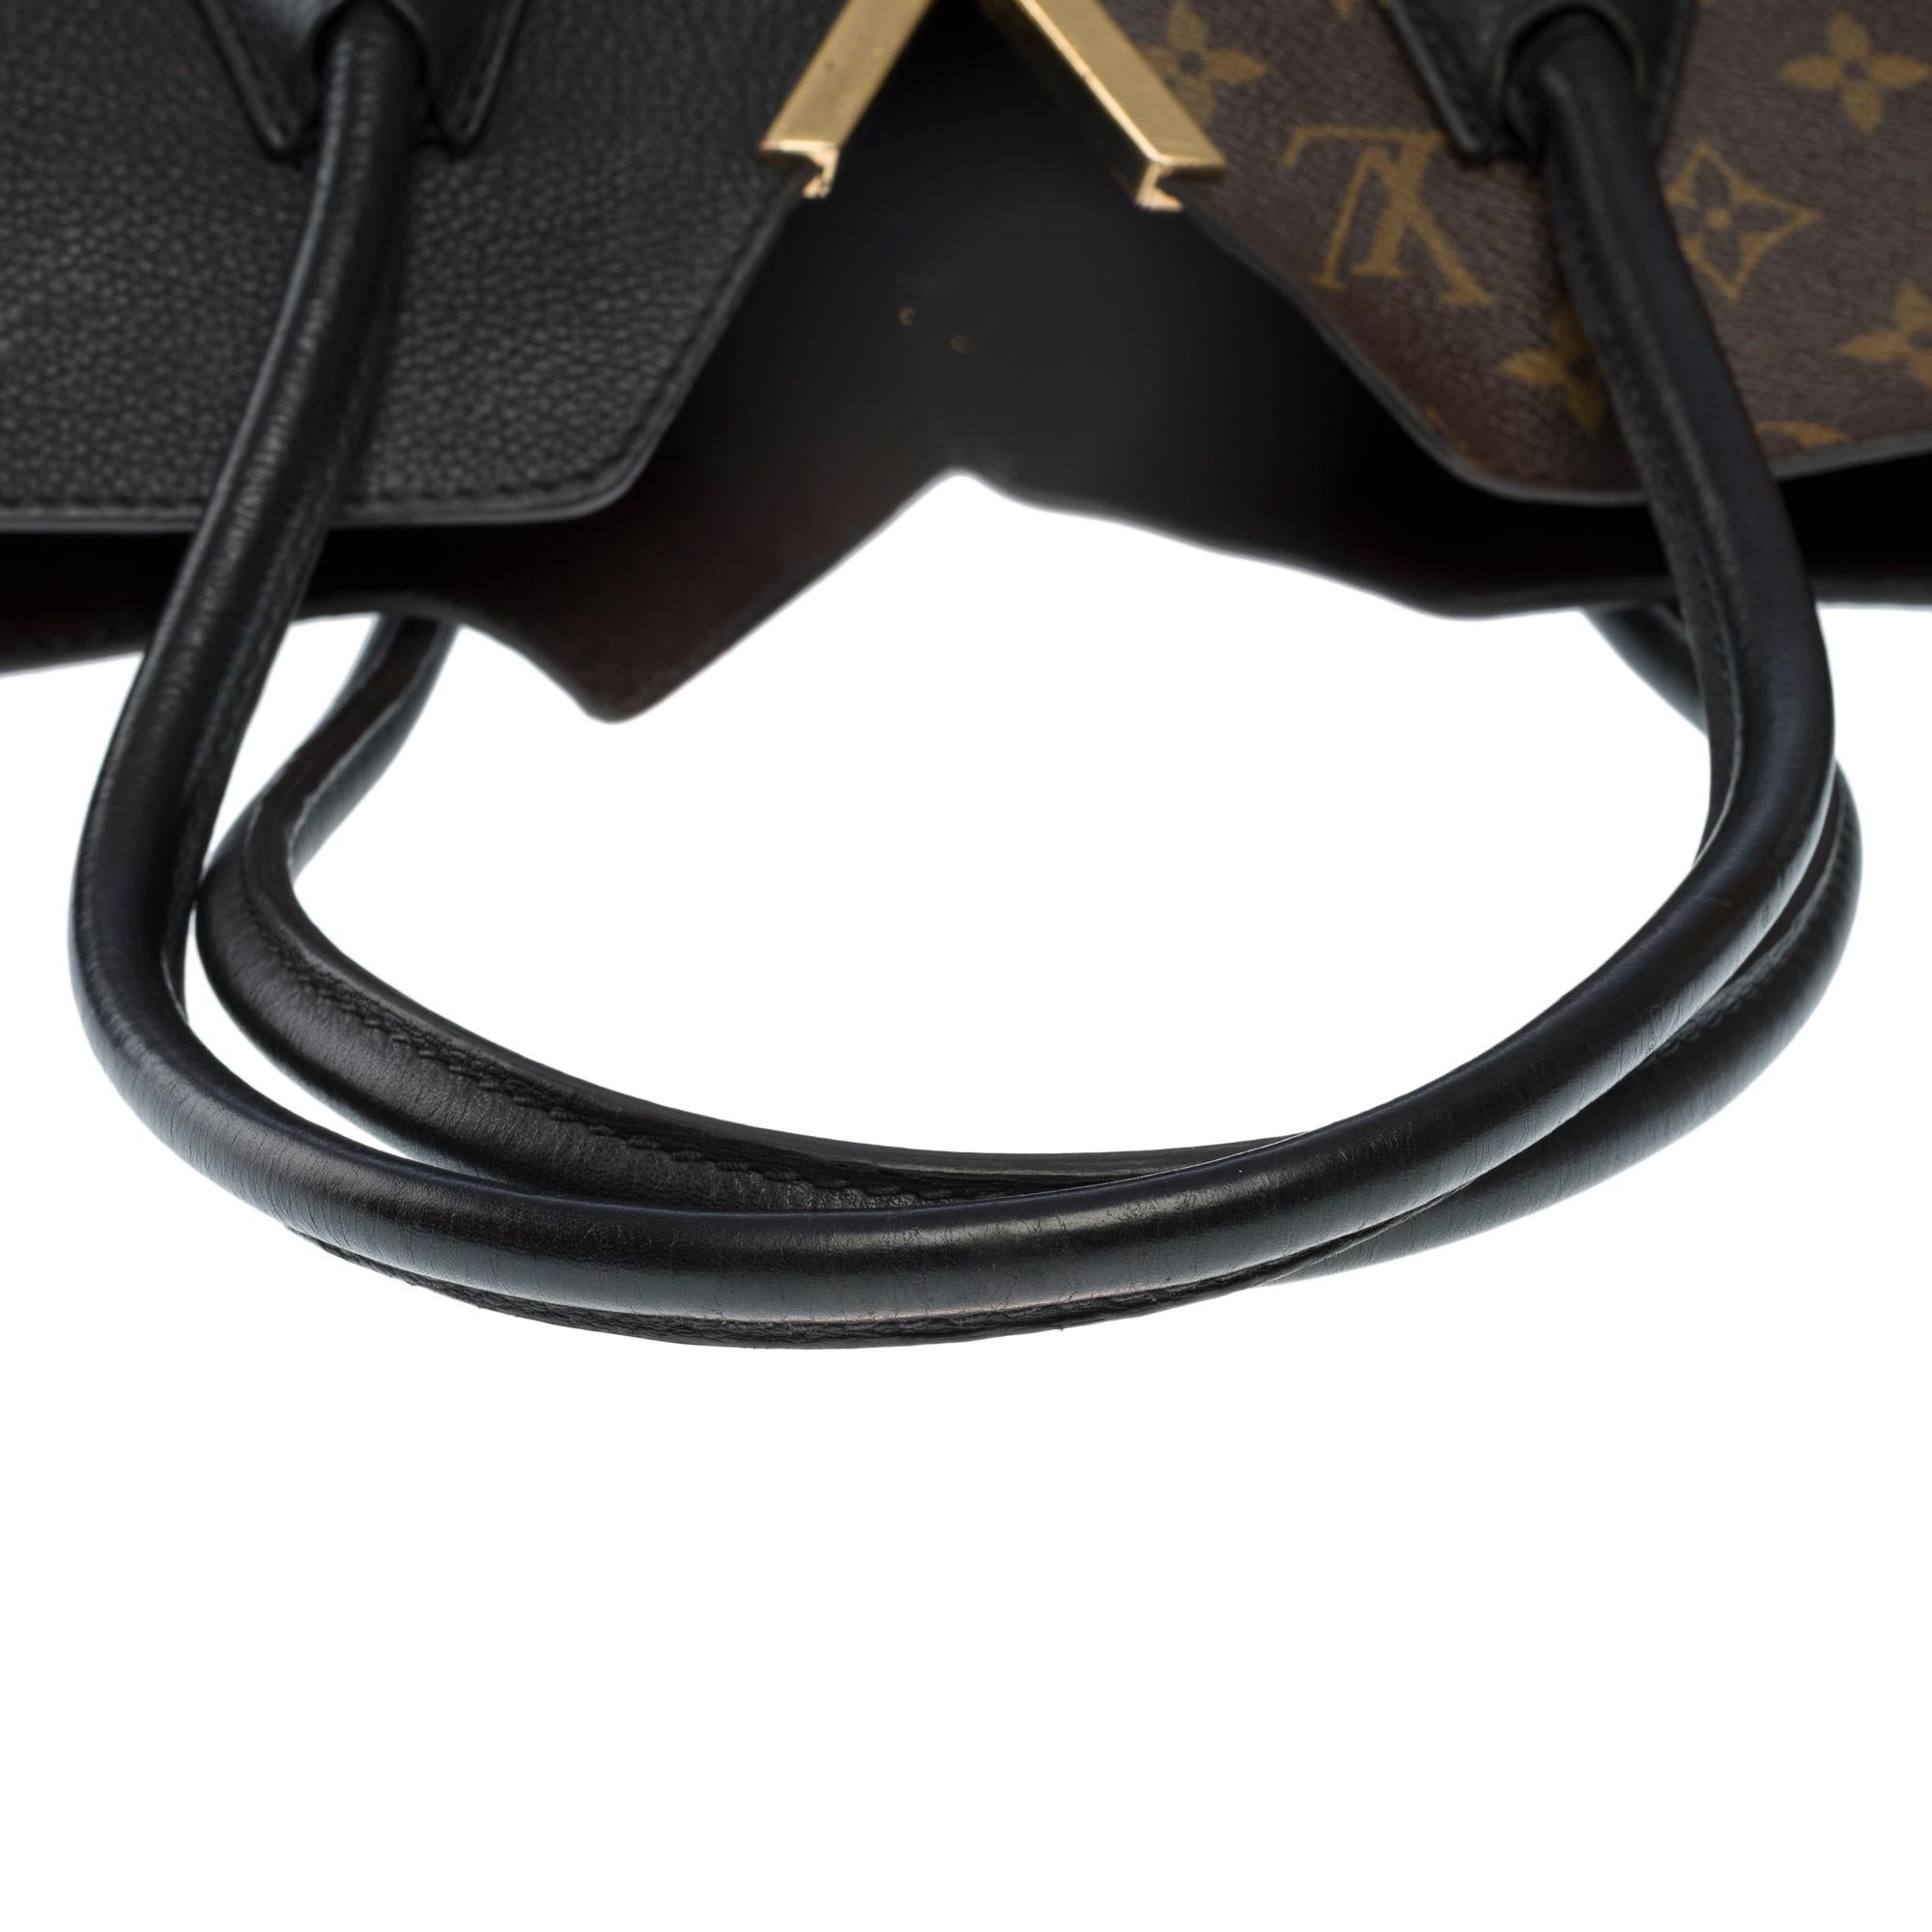 Louis Vuitton Kimono Tote bag in brown monogram canvas and black leather, GHW For Sale 5